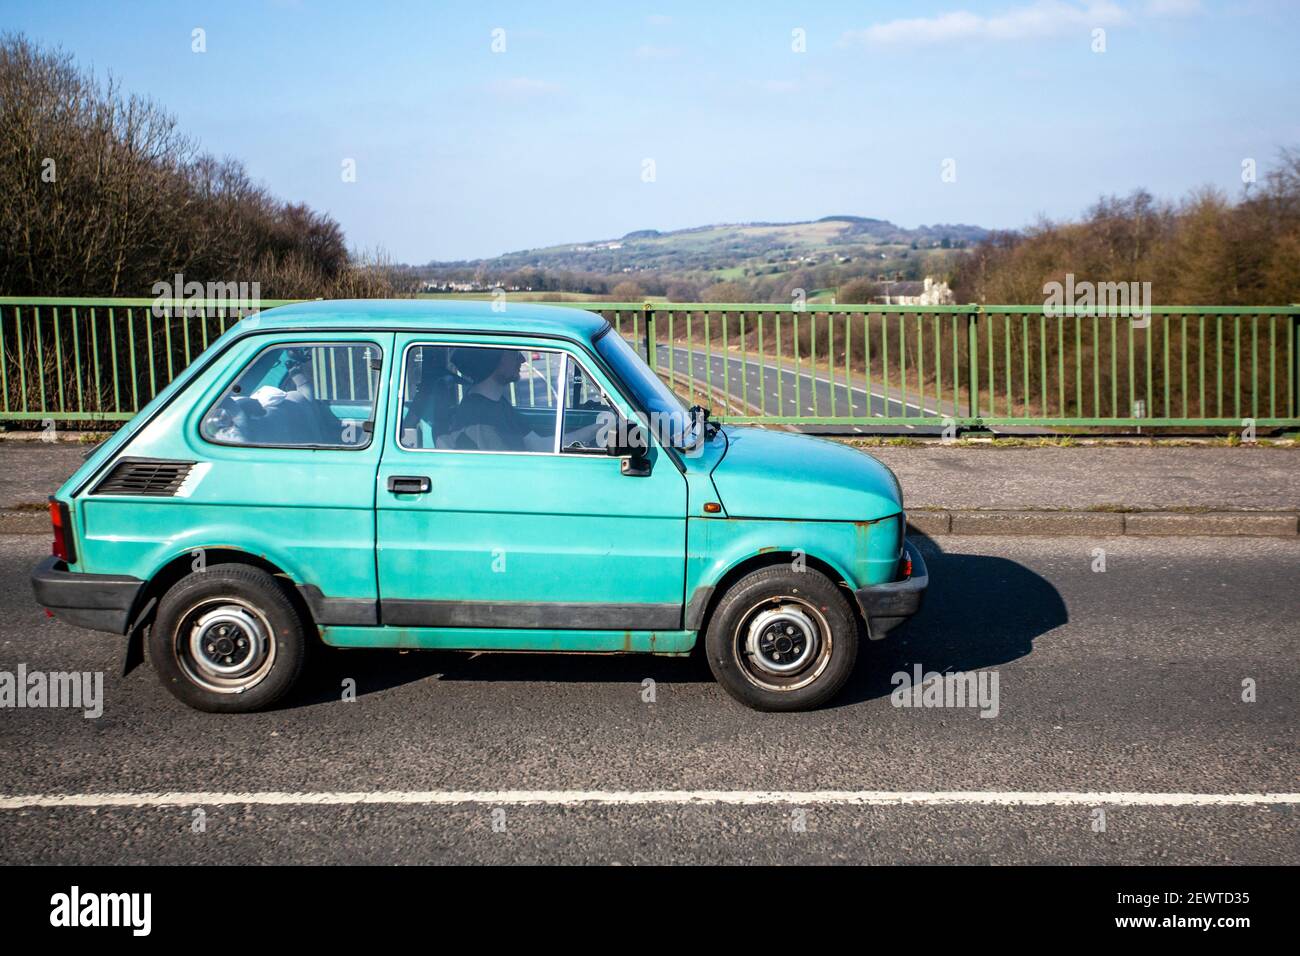 1993, 90s, 2dr blue Fiat Type 126, a four passenger, rear-engined city car that was introduced by Fiat in October 1972; Classic cars, cherished veteran, restored old timer, collectible motors, vintage heritage, old preserved, collectable cars crossing the M6 motorway highway road network, UK Stock Photo